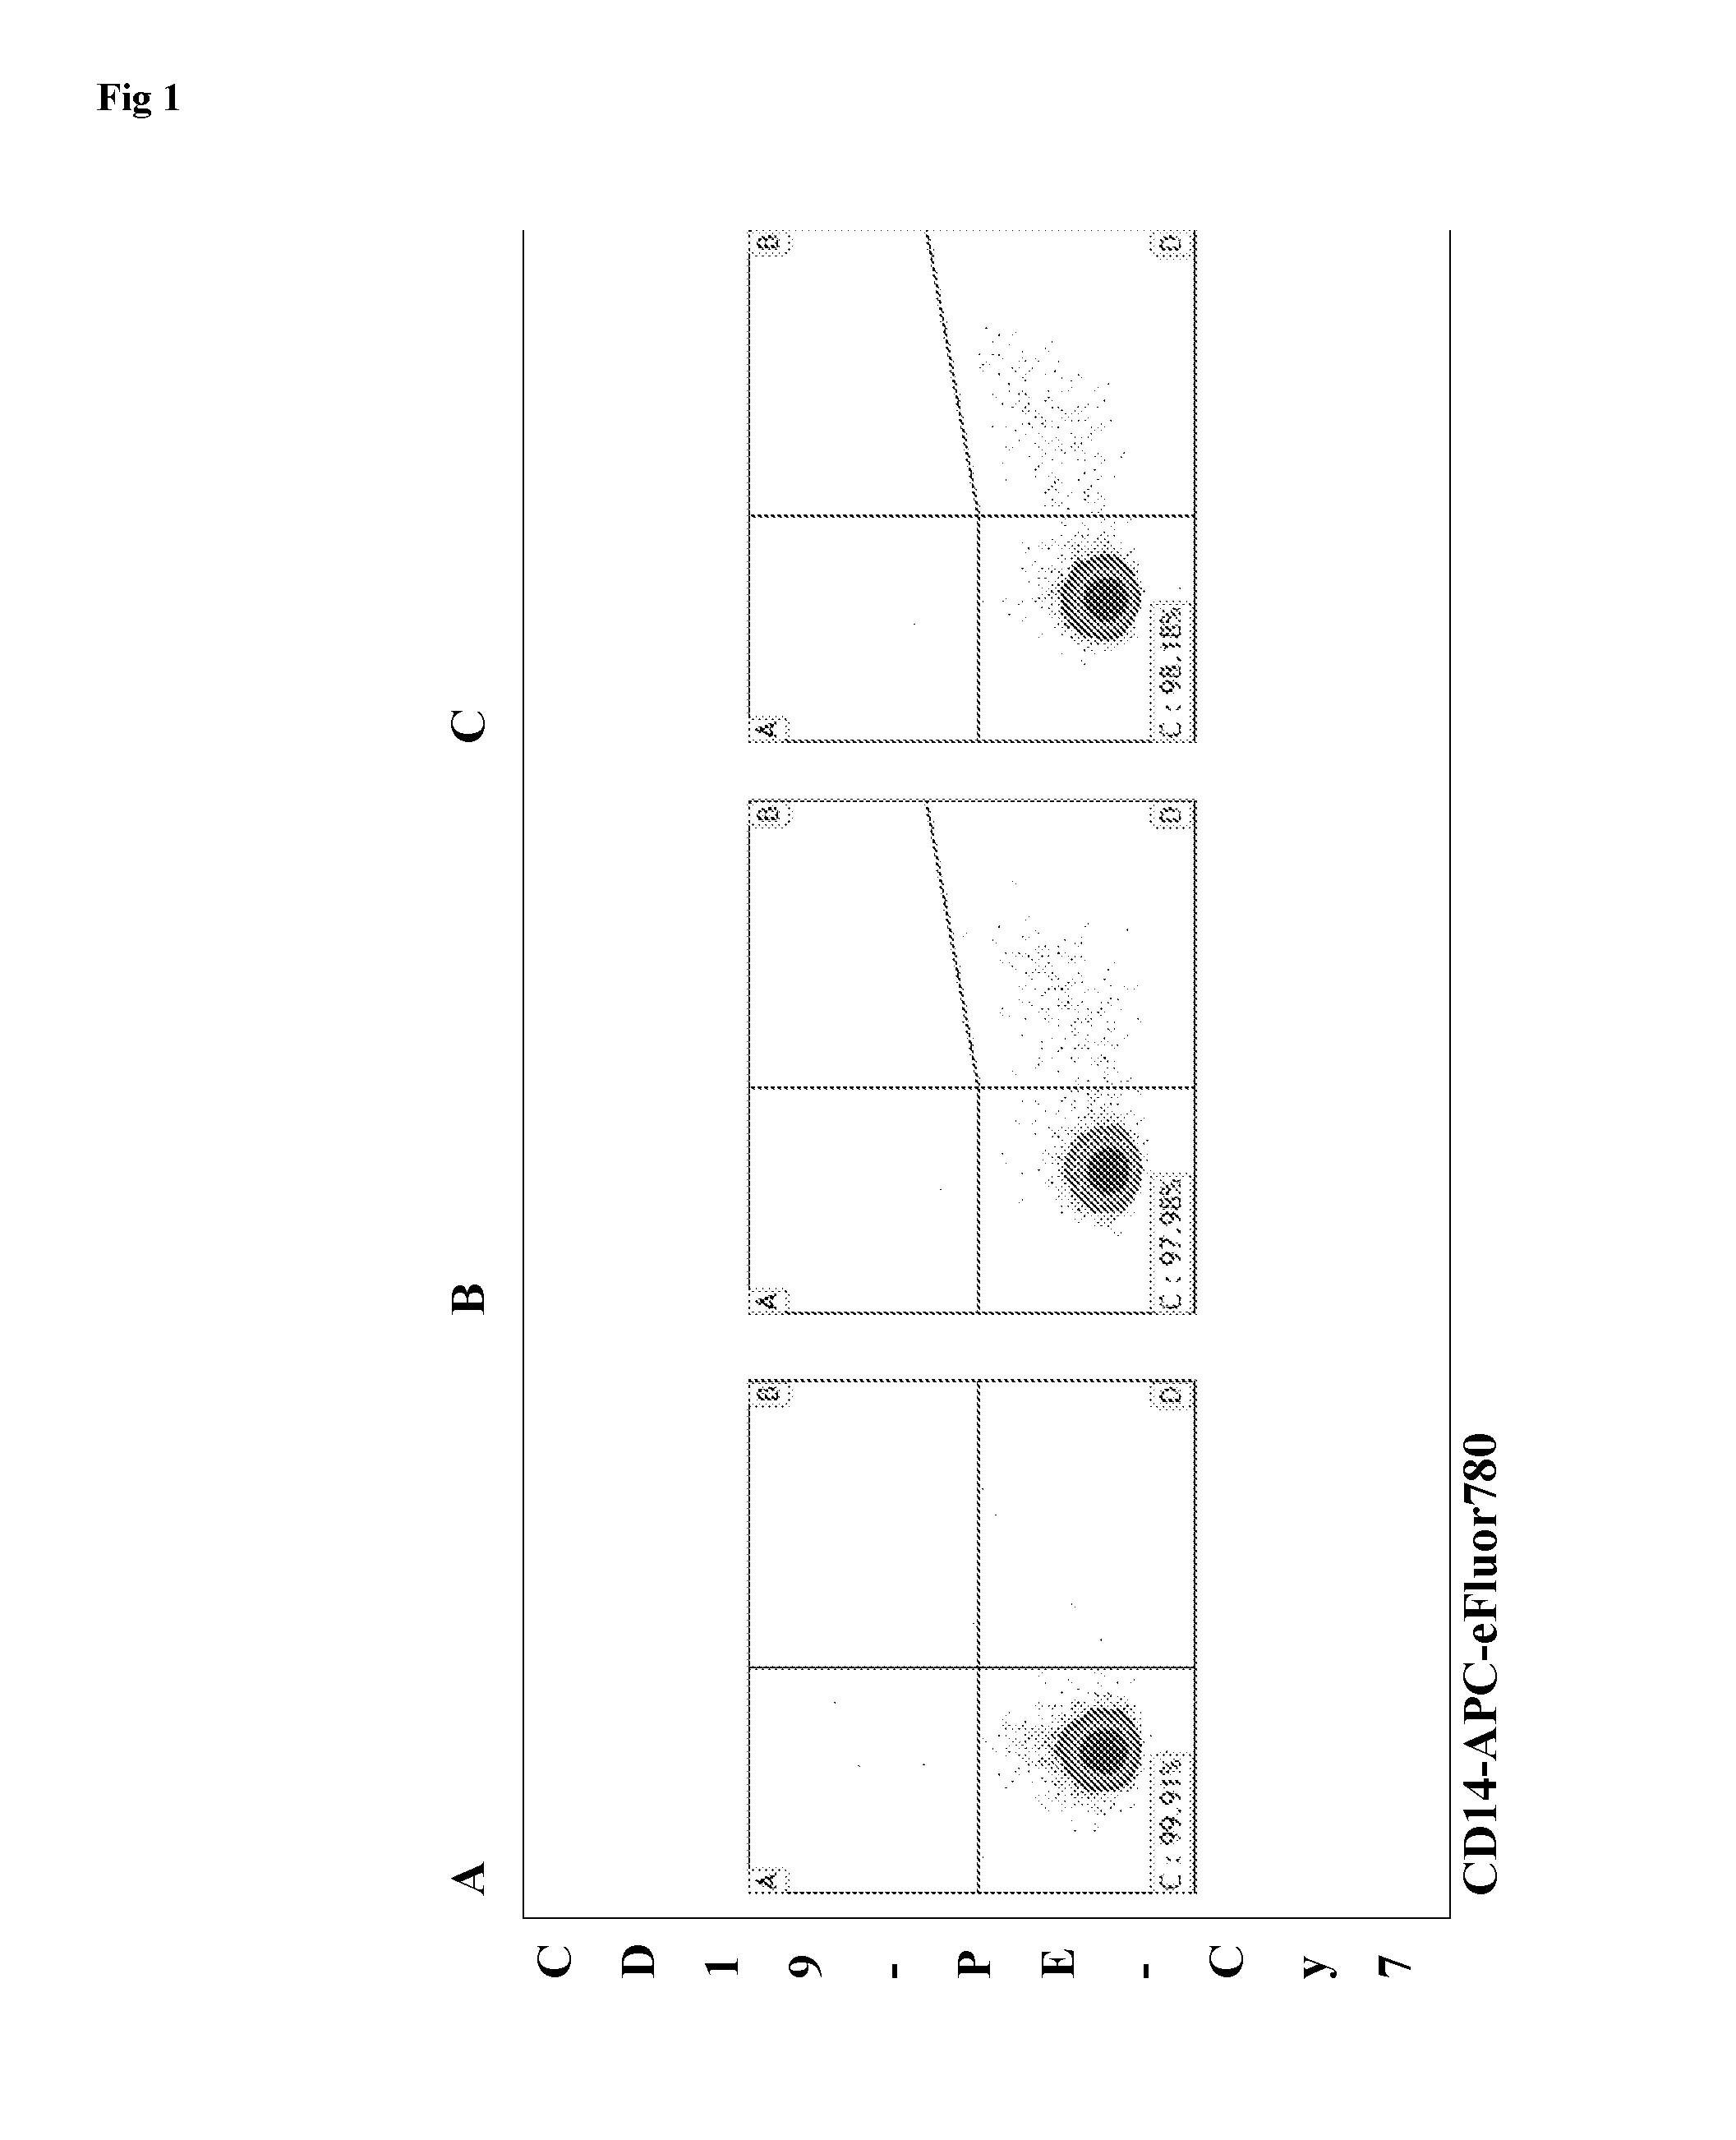 Multicolor flow cytometry method for identifying a population of cells, in particular mesenchymal stem cells